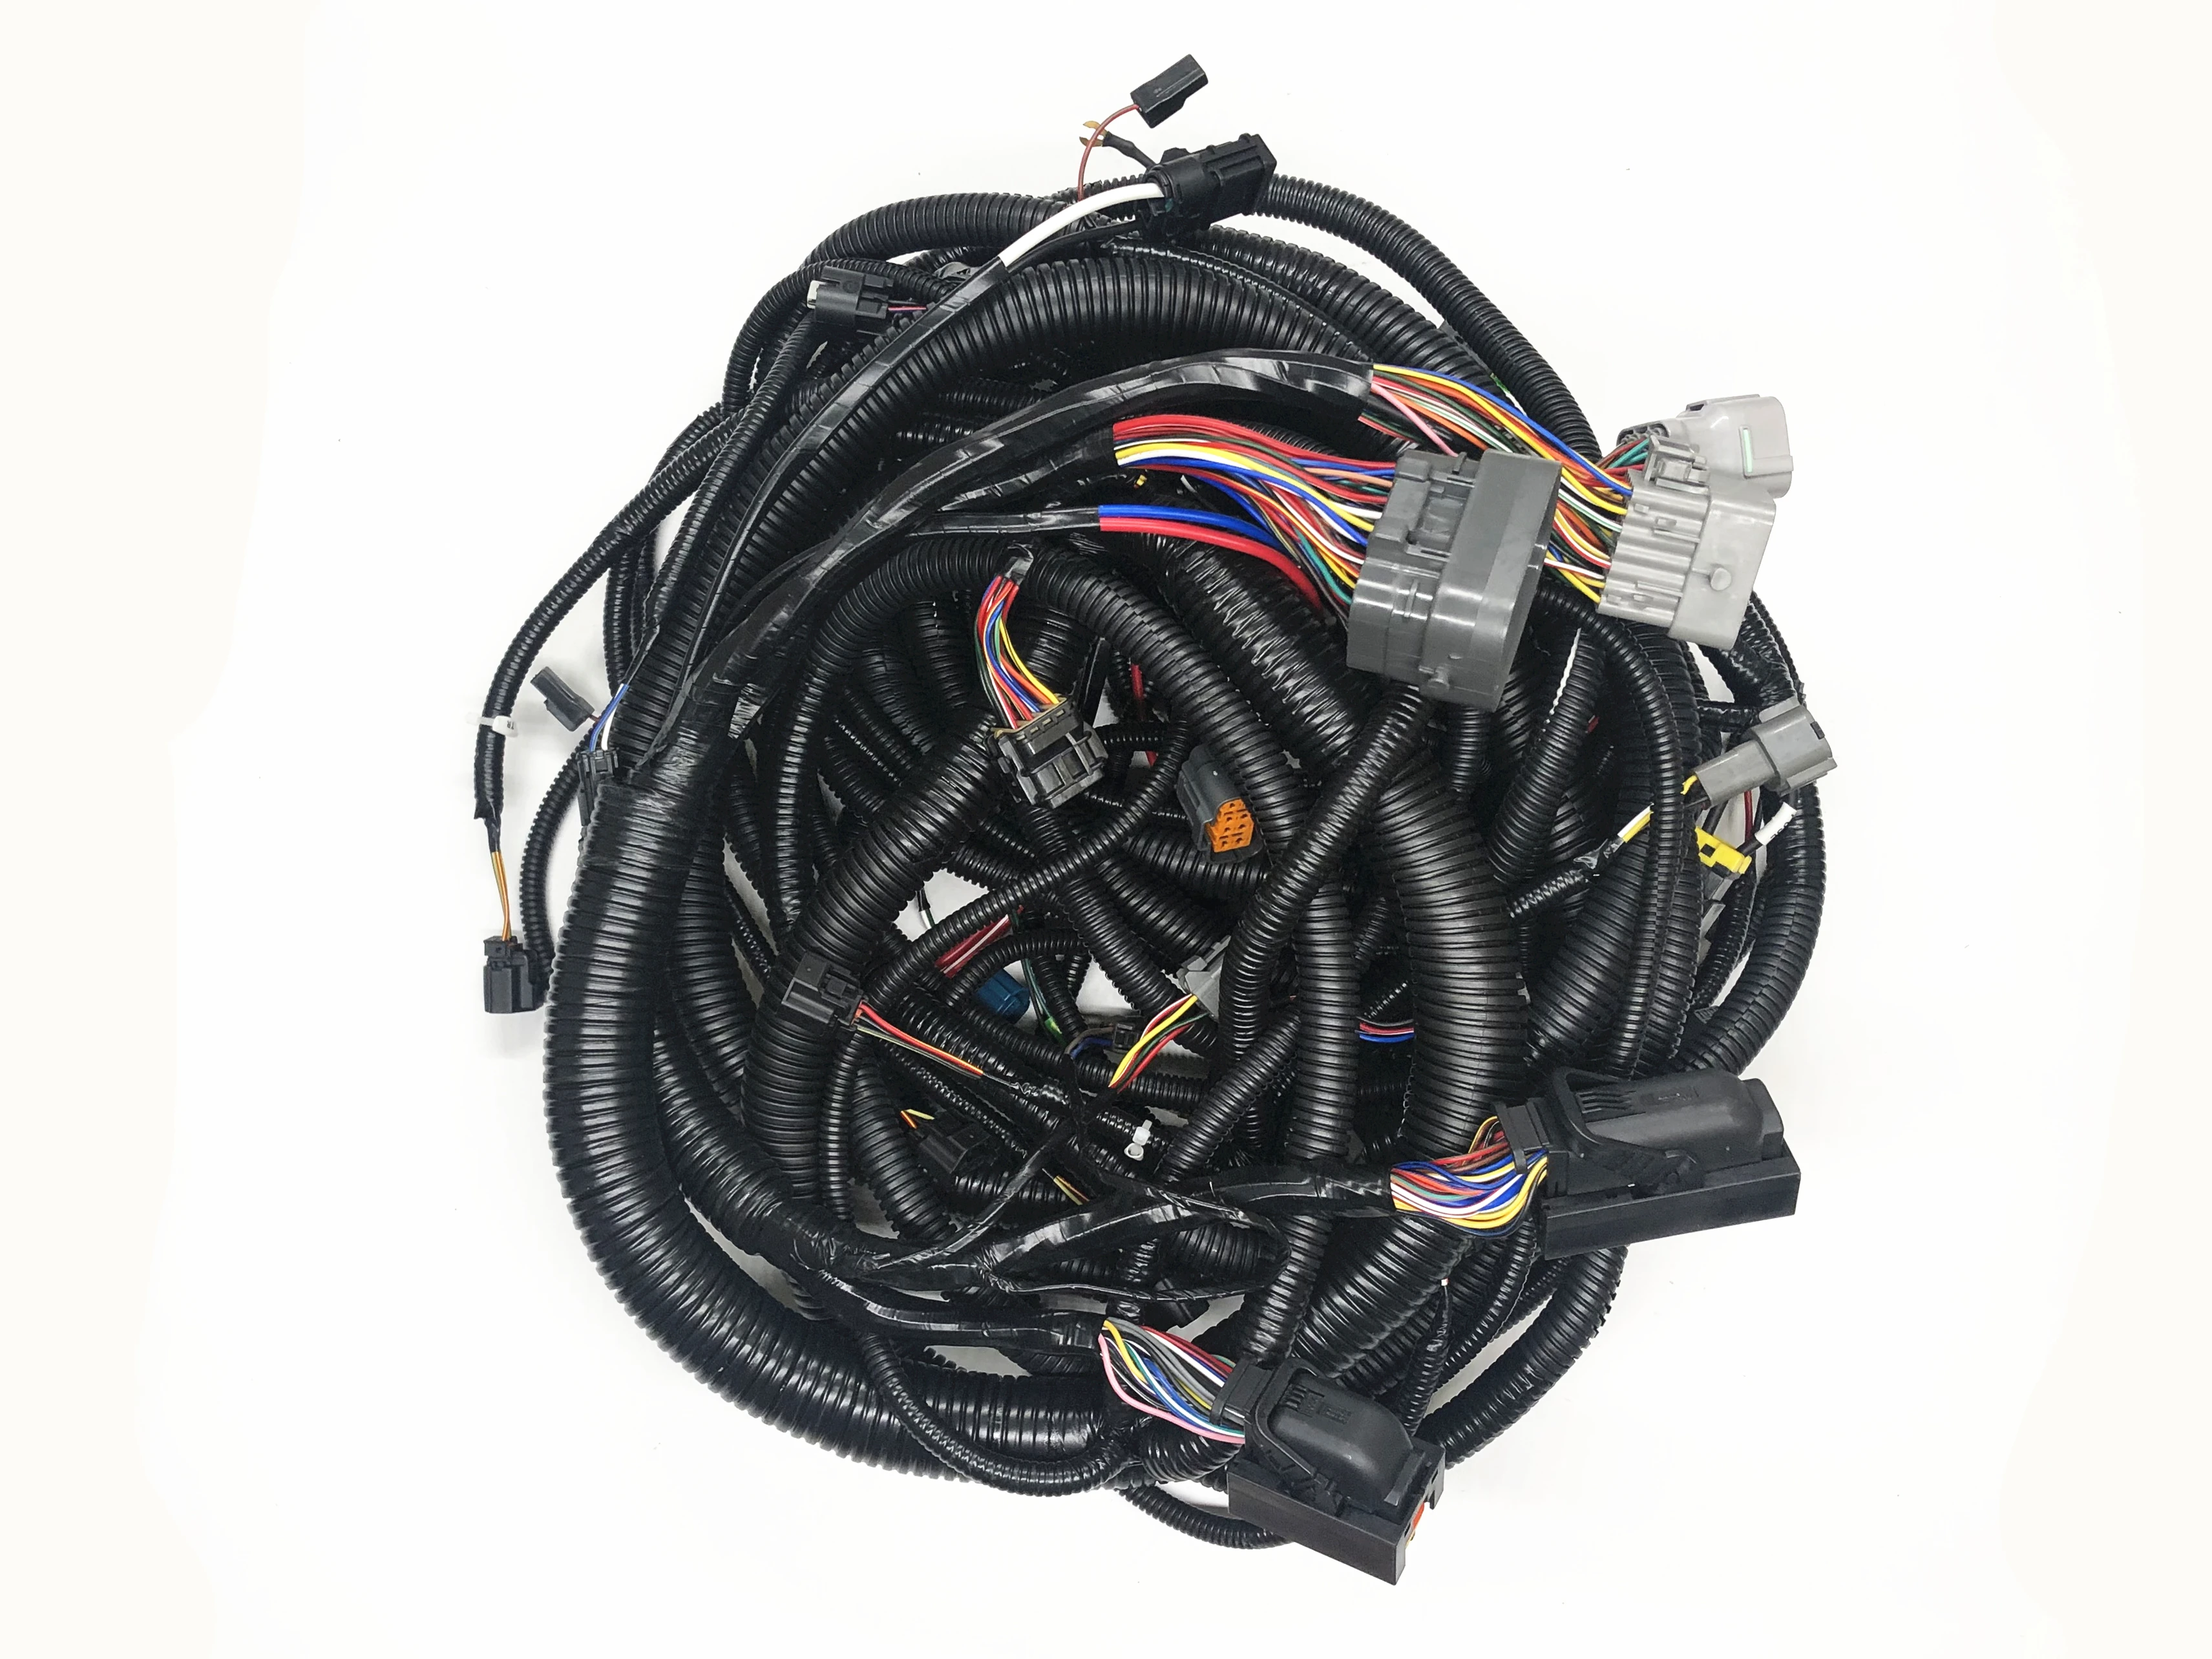 

Fast Free shipping! Hitachi excavator ZX270-3 body work Wire Harness- accessories -ZAX270-3 exterior harness -Hitachi out wire